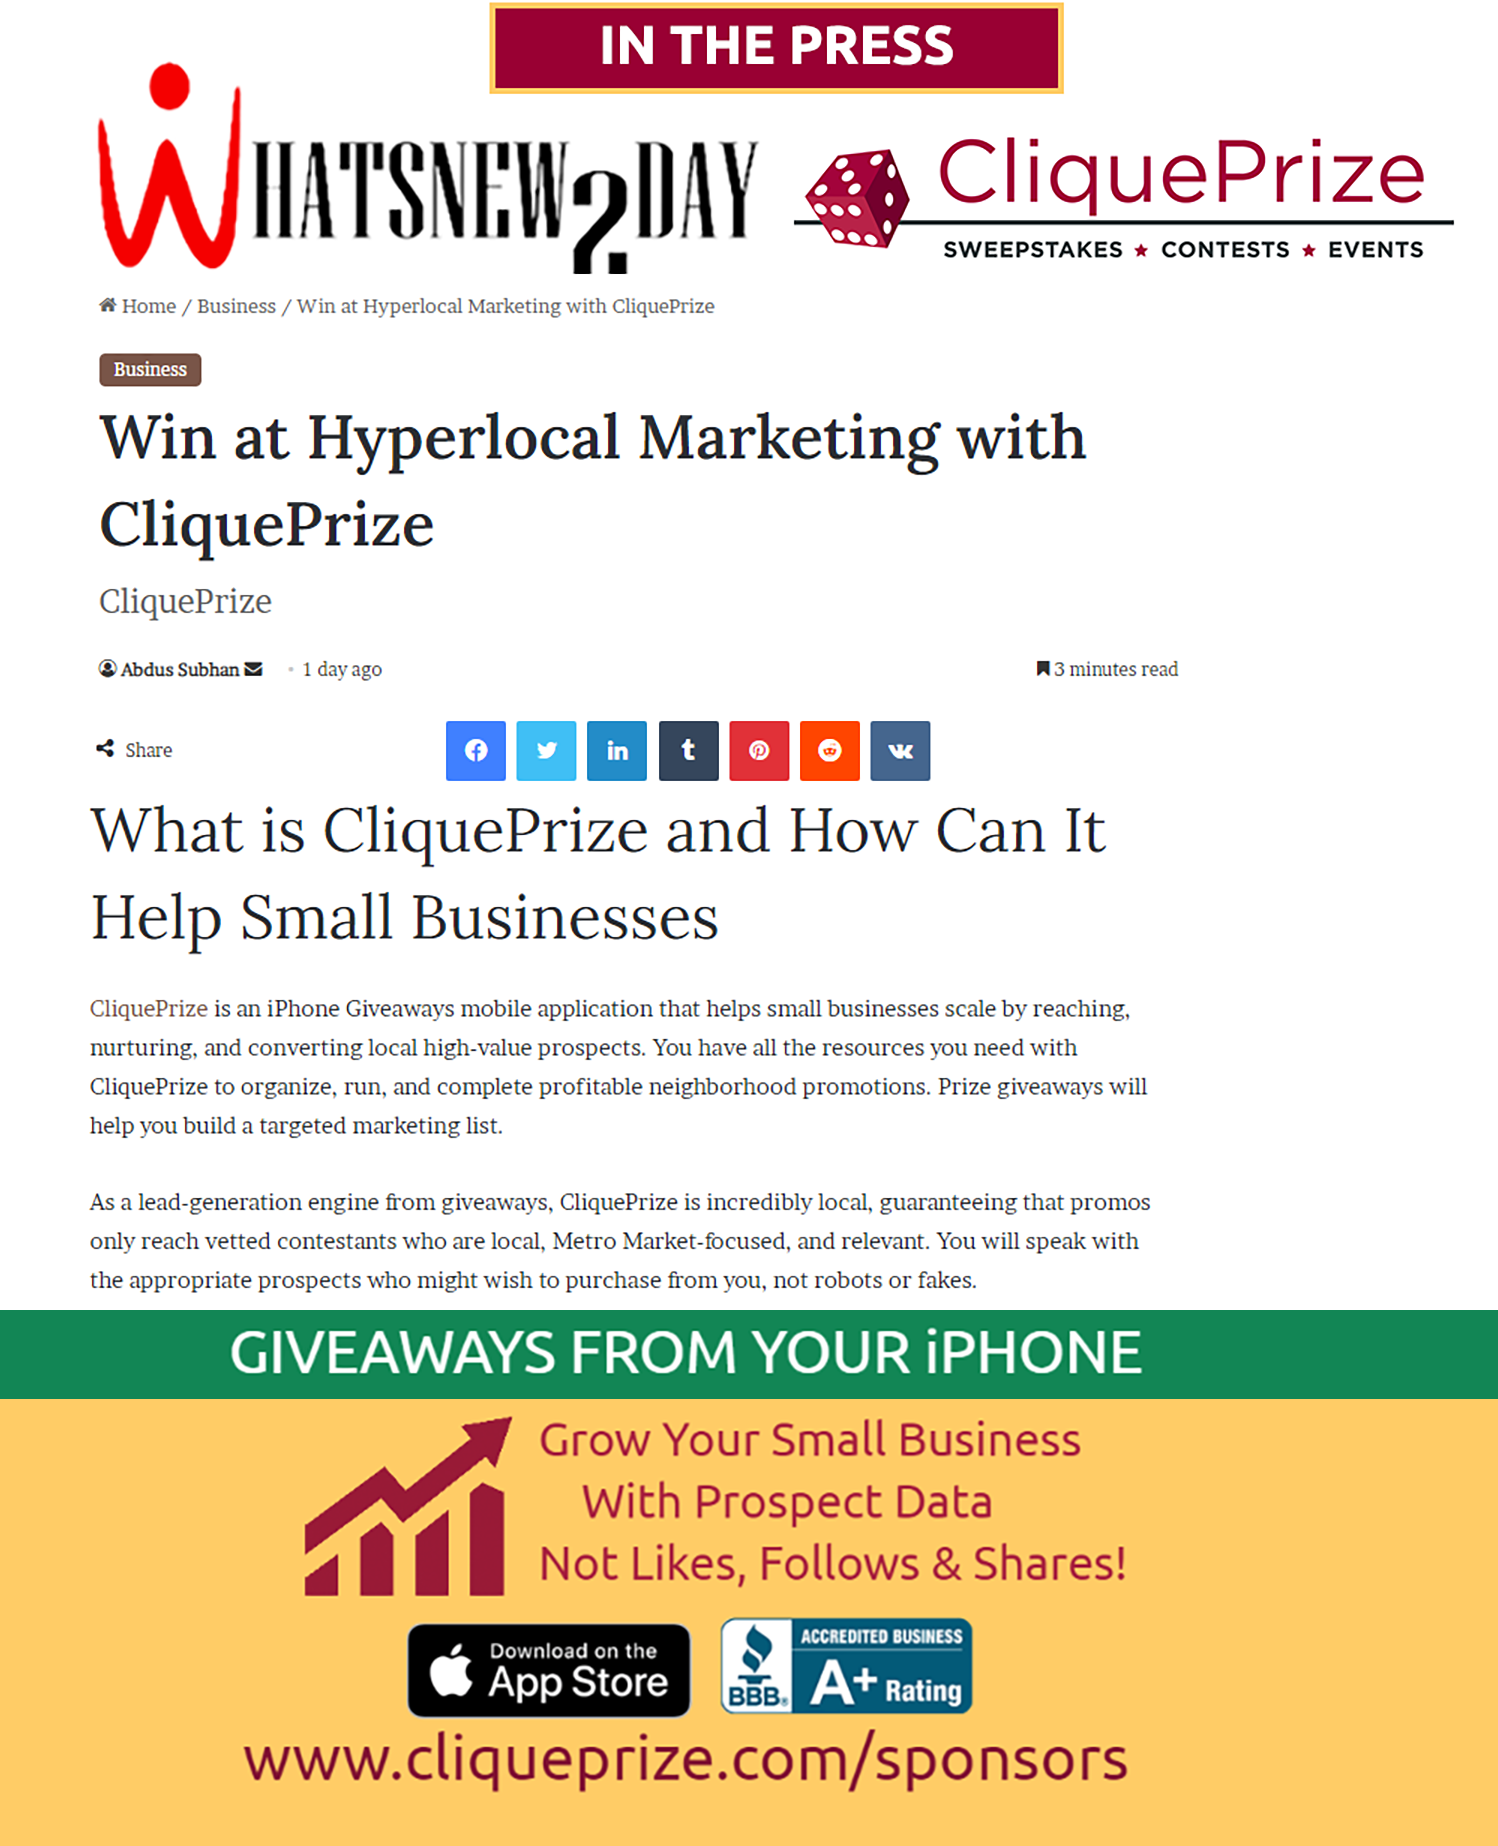 WhatsNew2Day: Win at Hyperlocal Marketing with CliquePrize